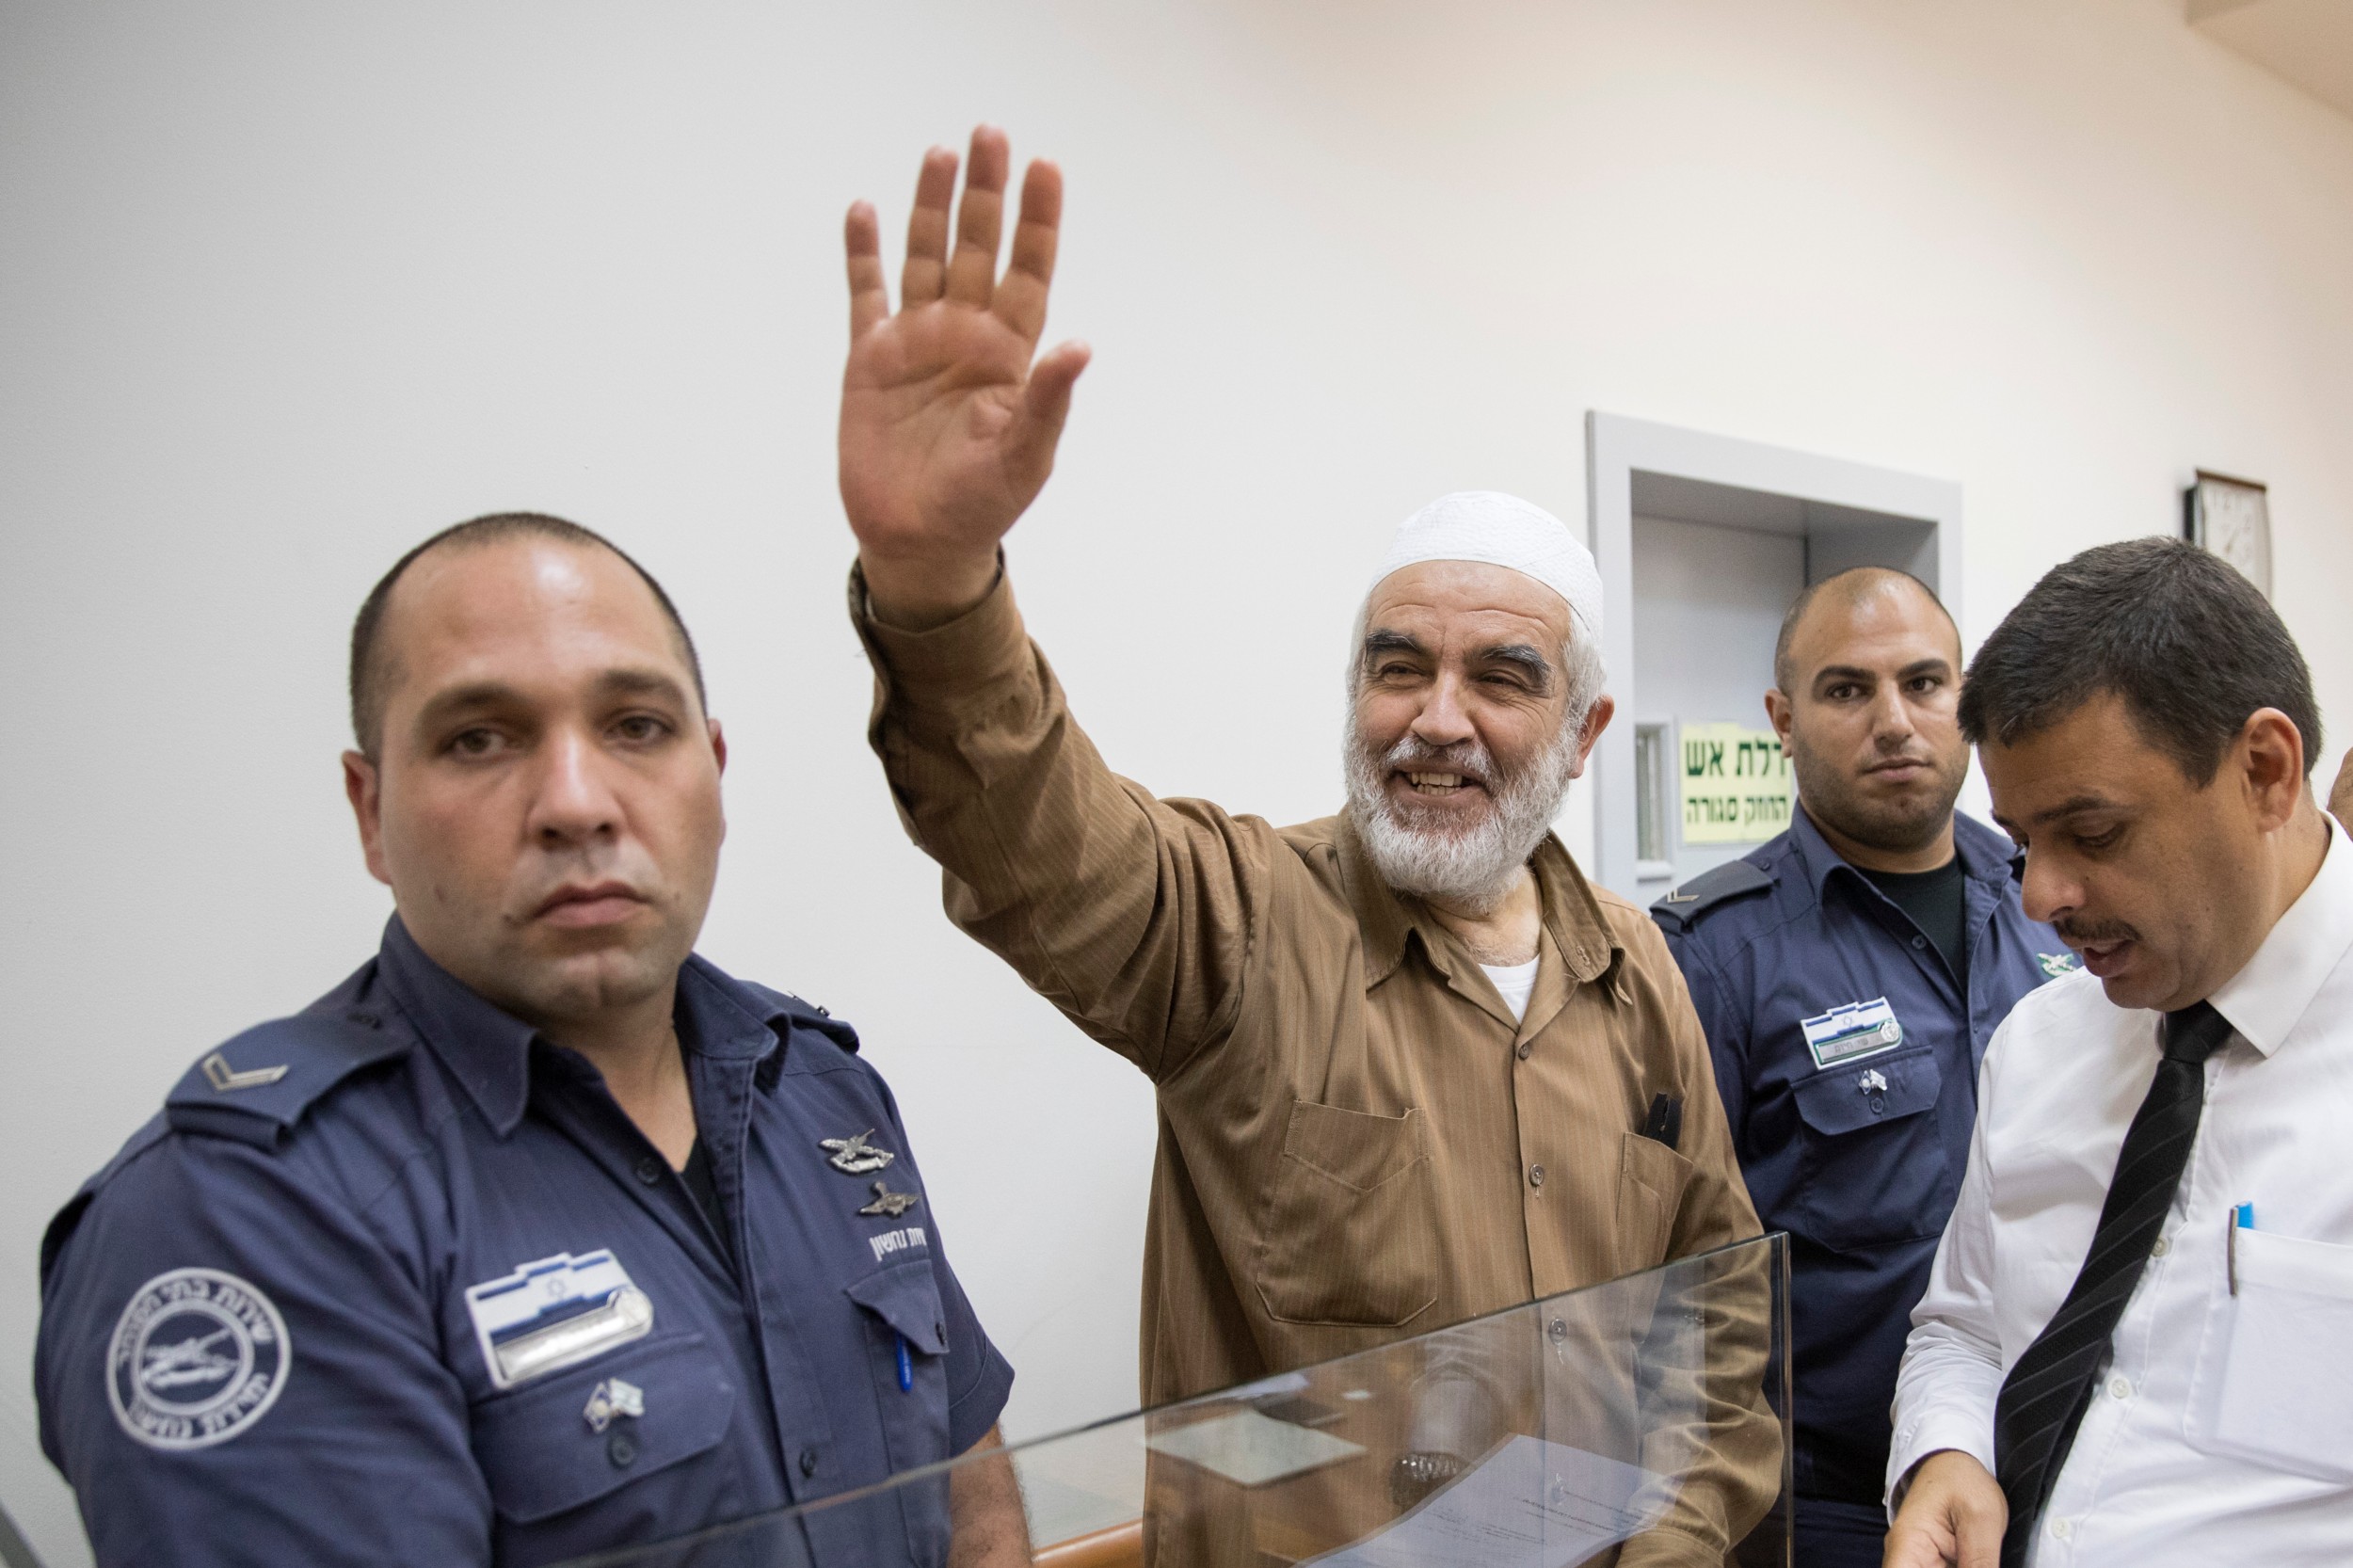 Sheikh Raed Salah: 'I head to prison standing by my values' | Middle East  Eye